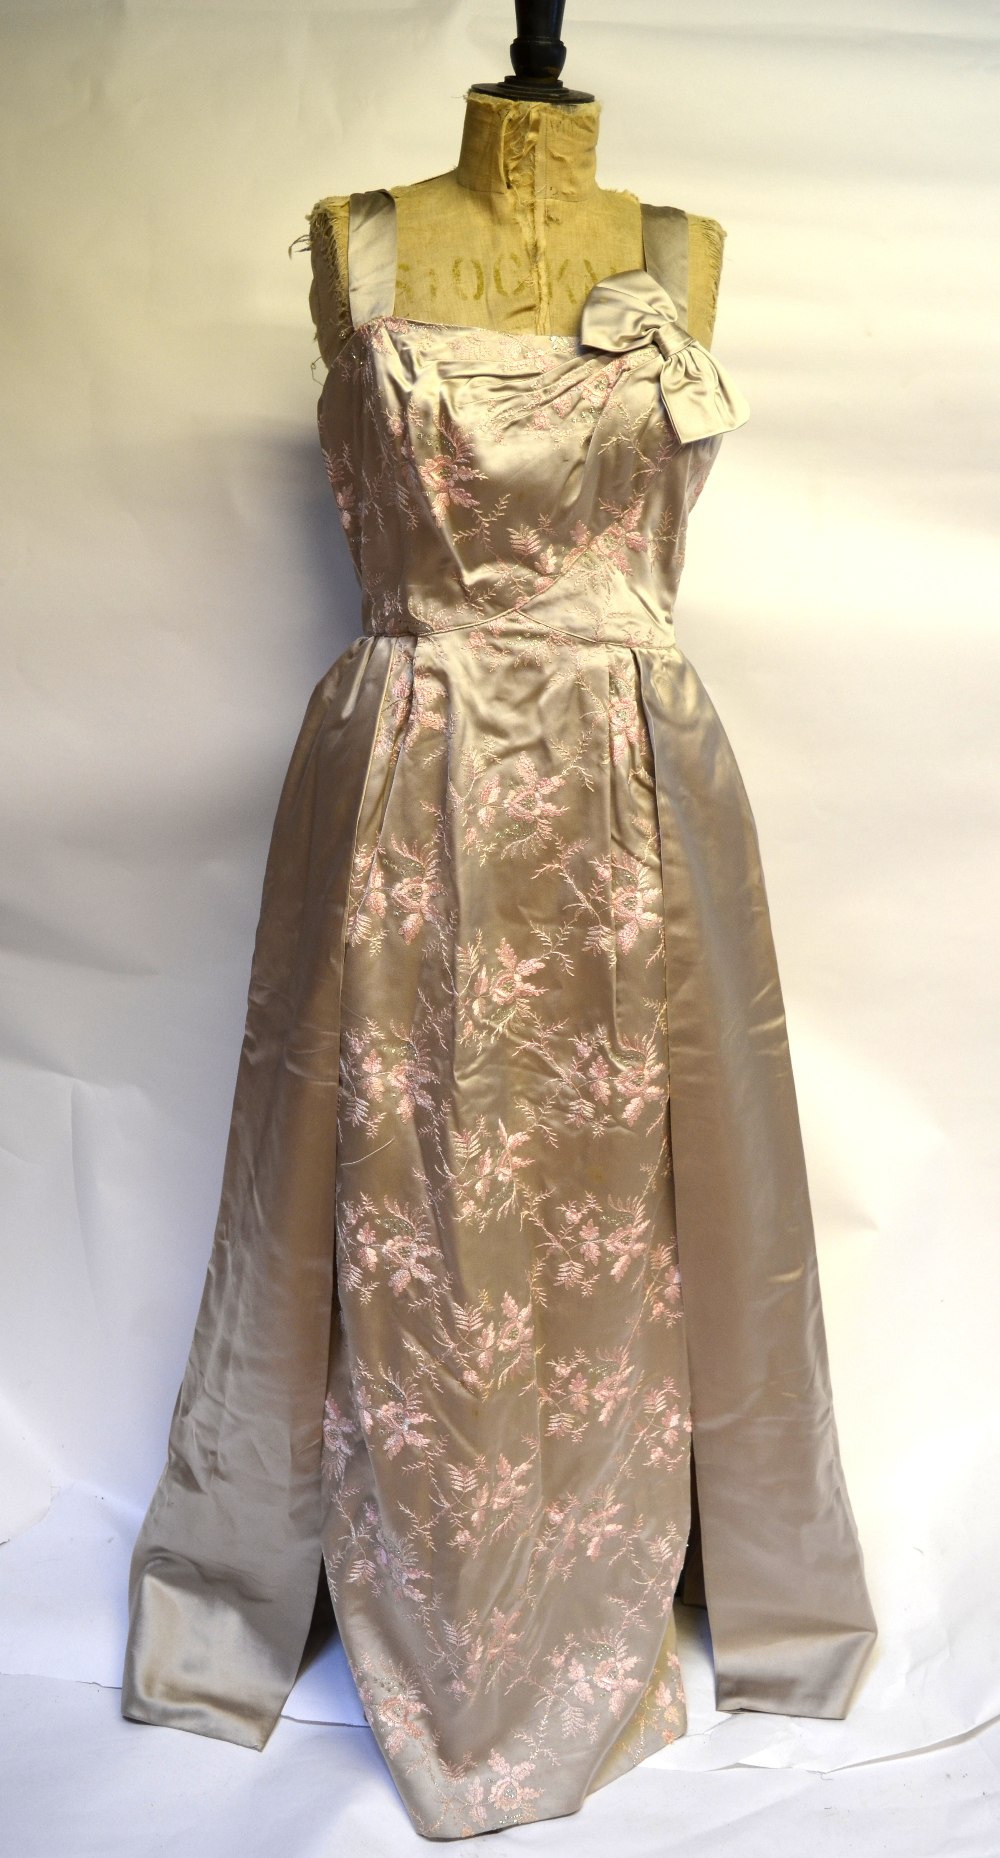 A 1950s ball gown oyster silk satin, floral and metallised thread brocade with structured bodice and